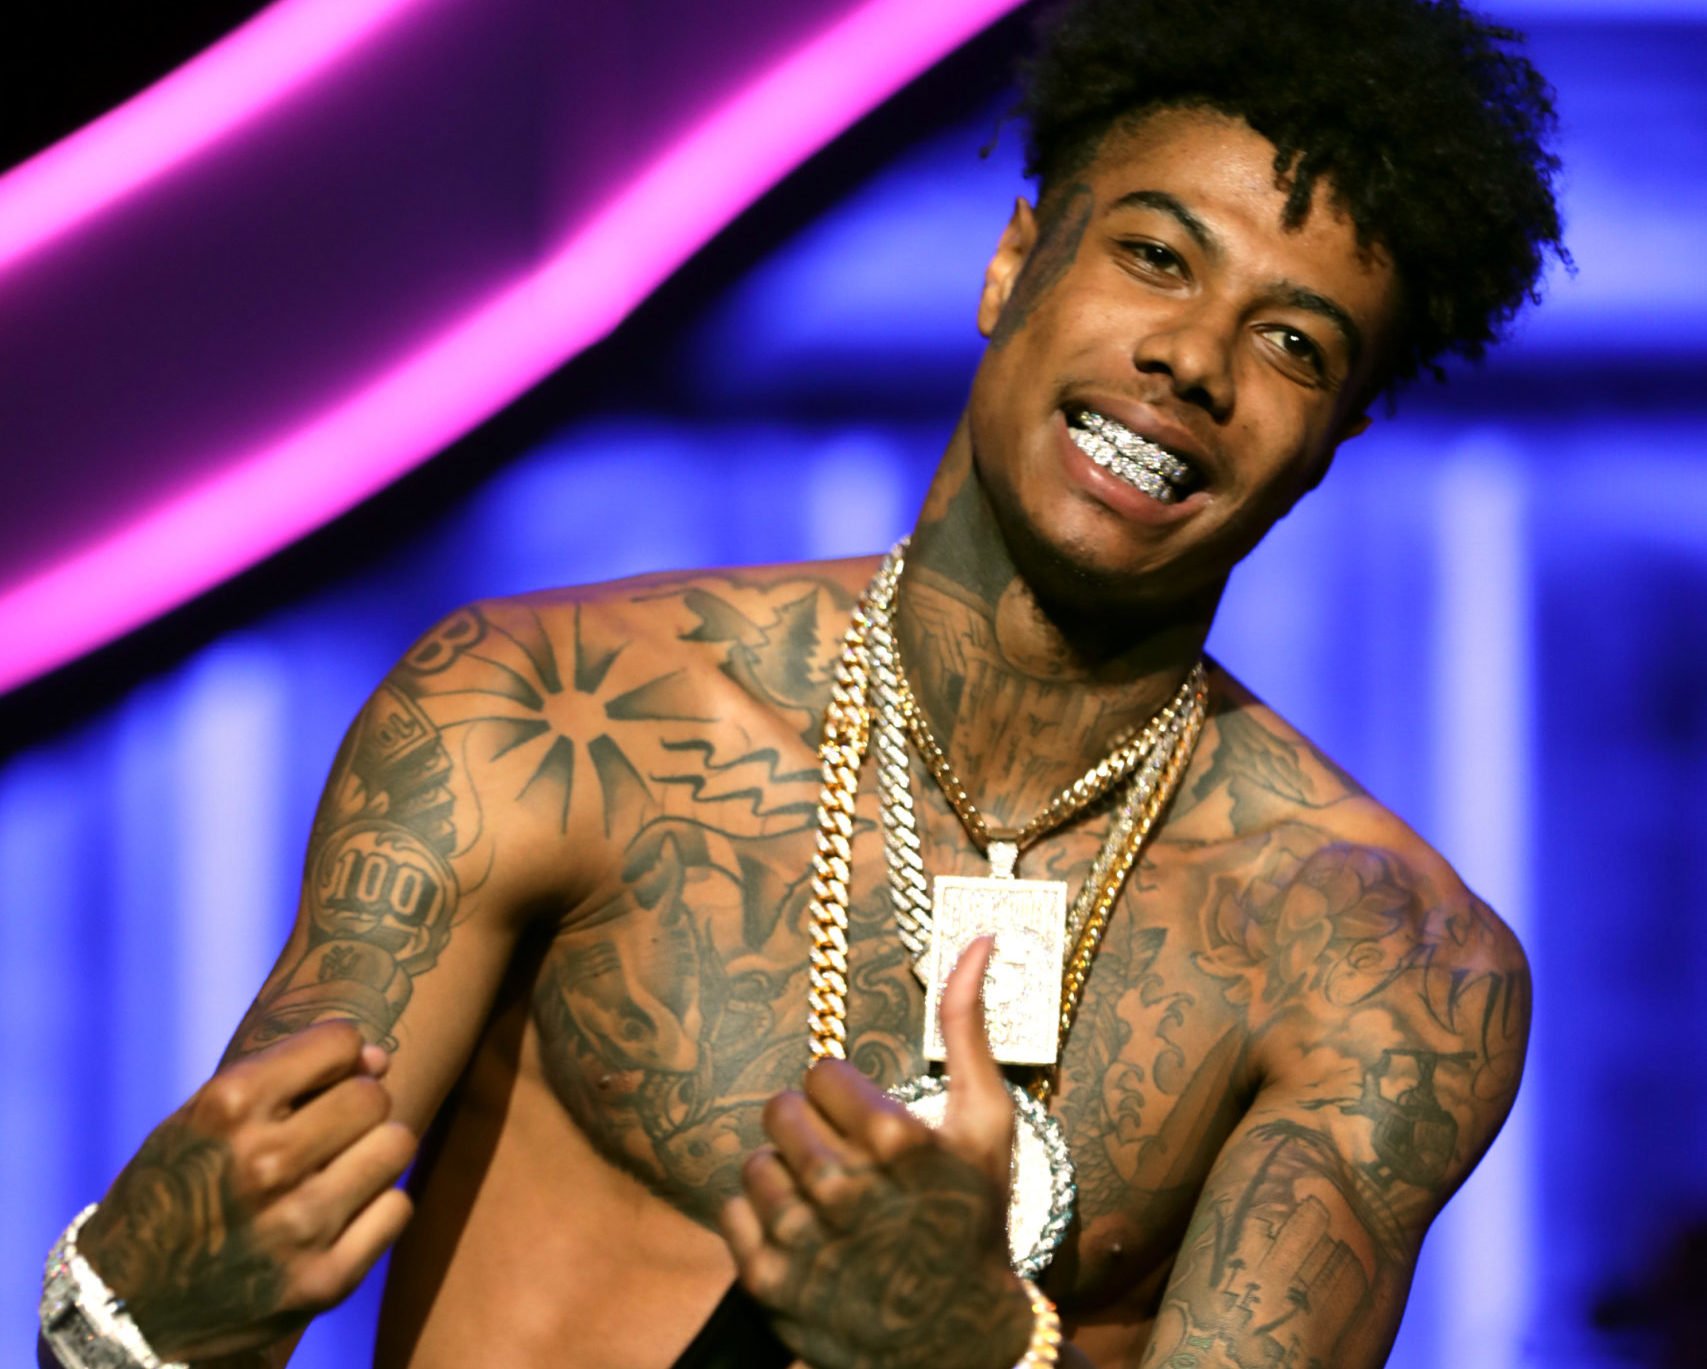 Blueface Offers Lengthy Clarification About What’s Really Going Down In His Bad Girls Club—“I Don’t Have Relations With Any Of These Women”